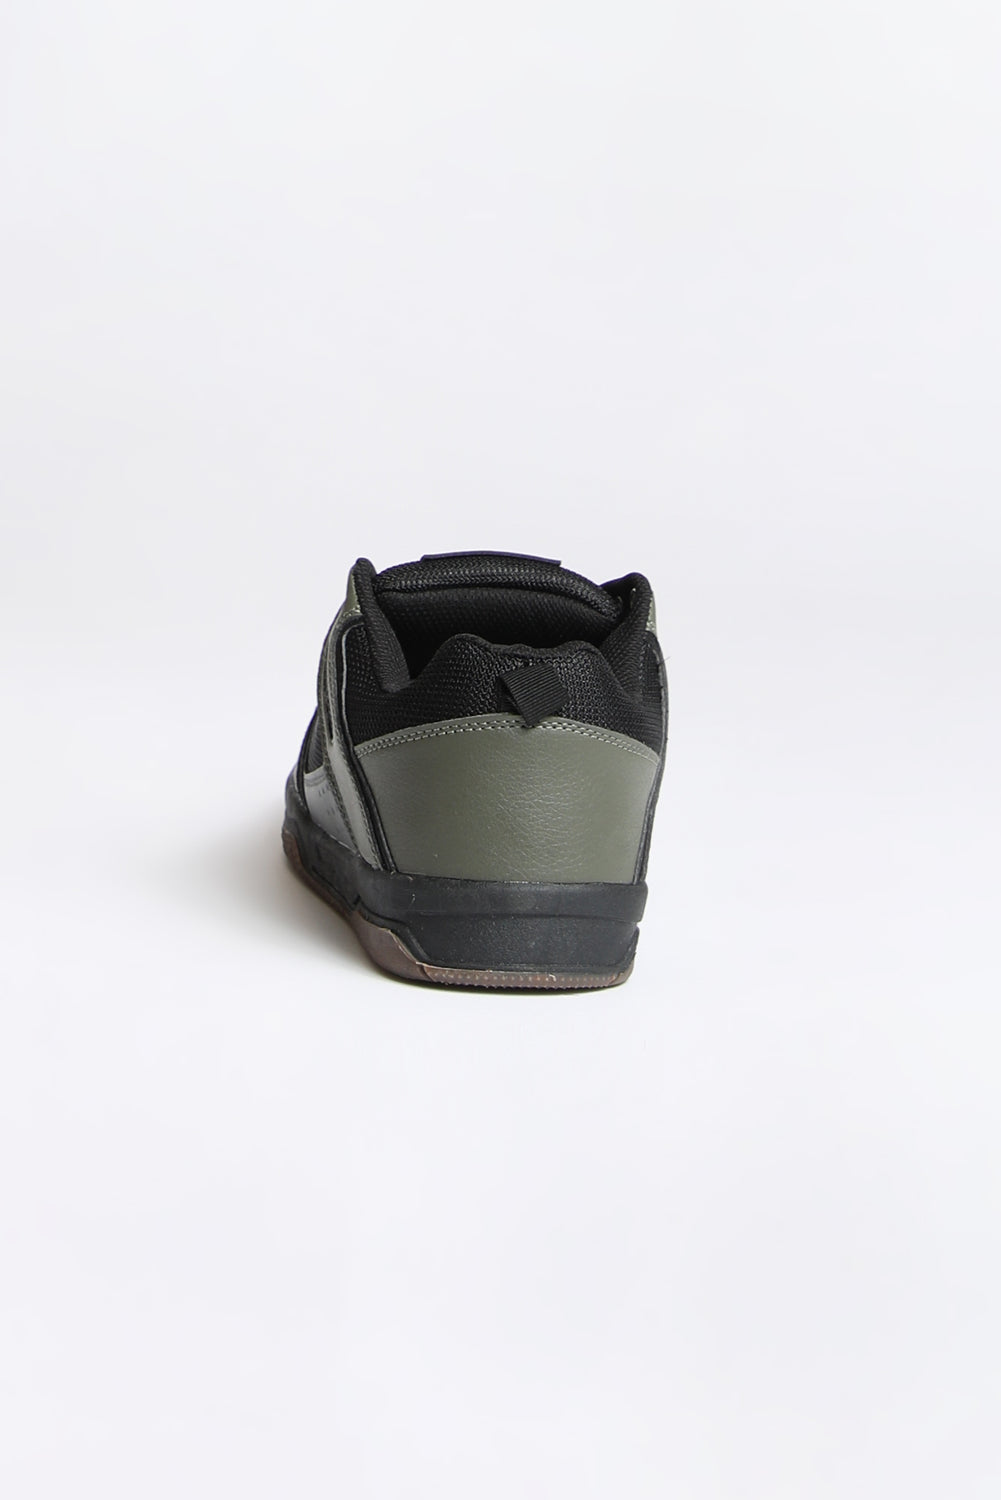 Zoo York Youth Carter Shoes Black